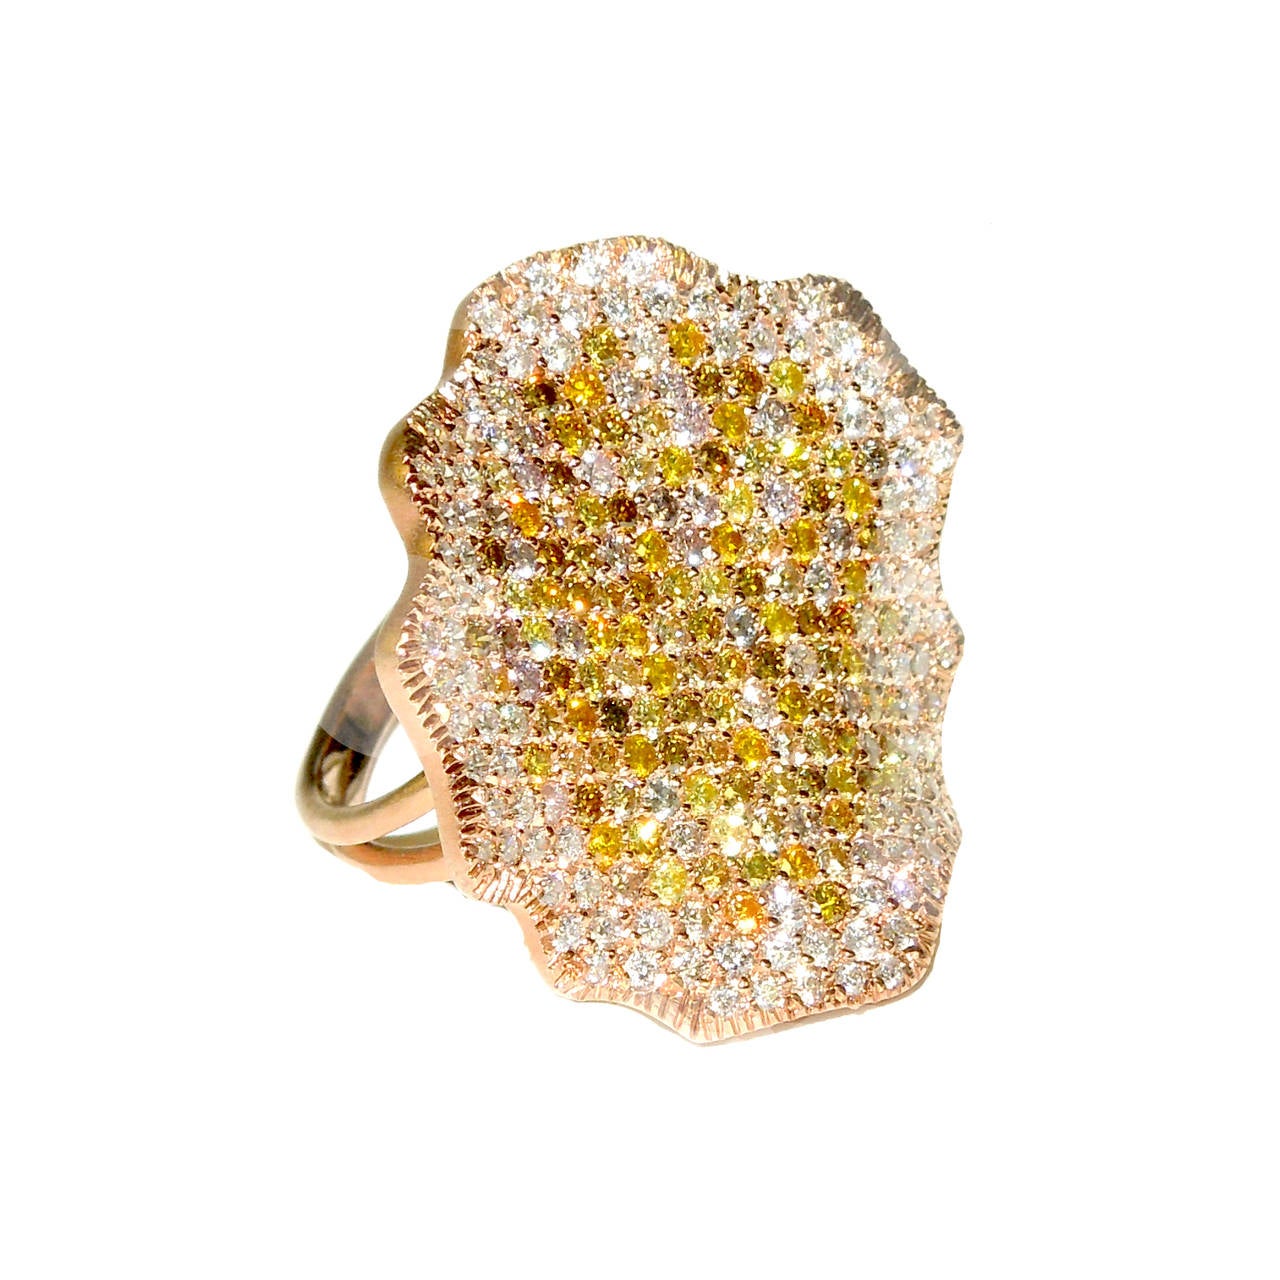 18K Pink Gold Ring with Multi-Color Diamonds

White Diamonds: G Color, VS Quality, 1.50 cts. 
Multi Color Diamonds VS Quality 2.25 cts. 

Diamonds are Pave Set with our shading technique.

Available sizes: 5-12.

Signed STAMBOLIAN with our